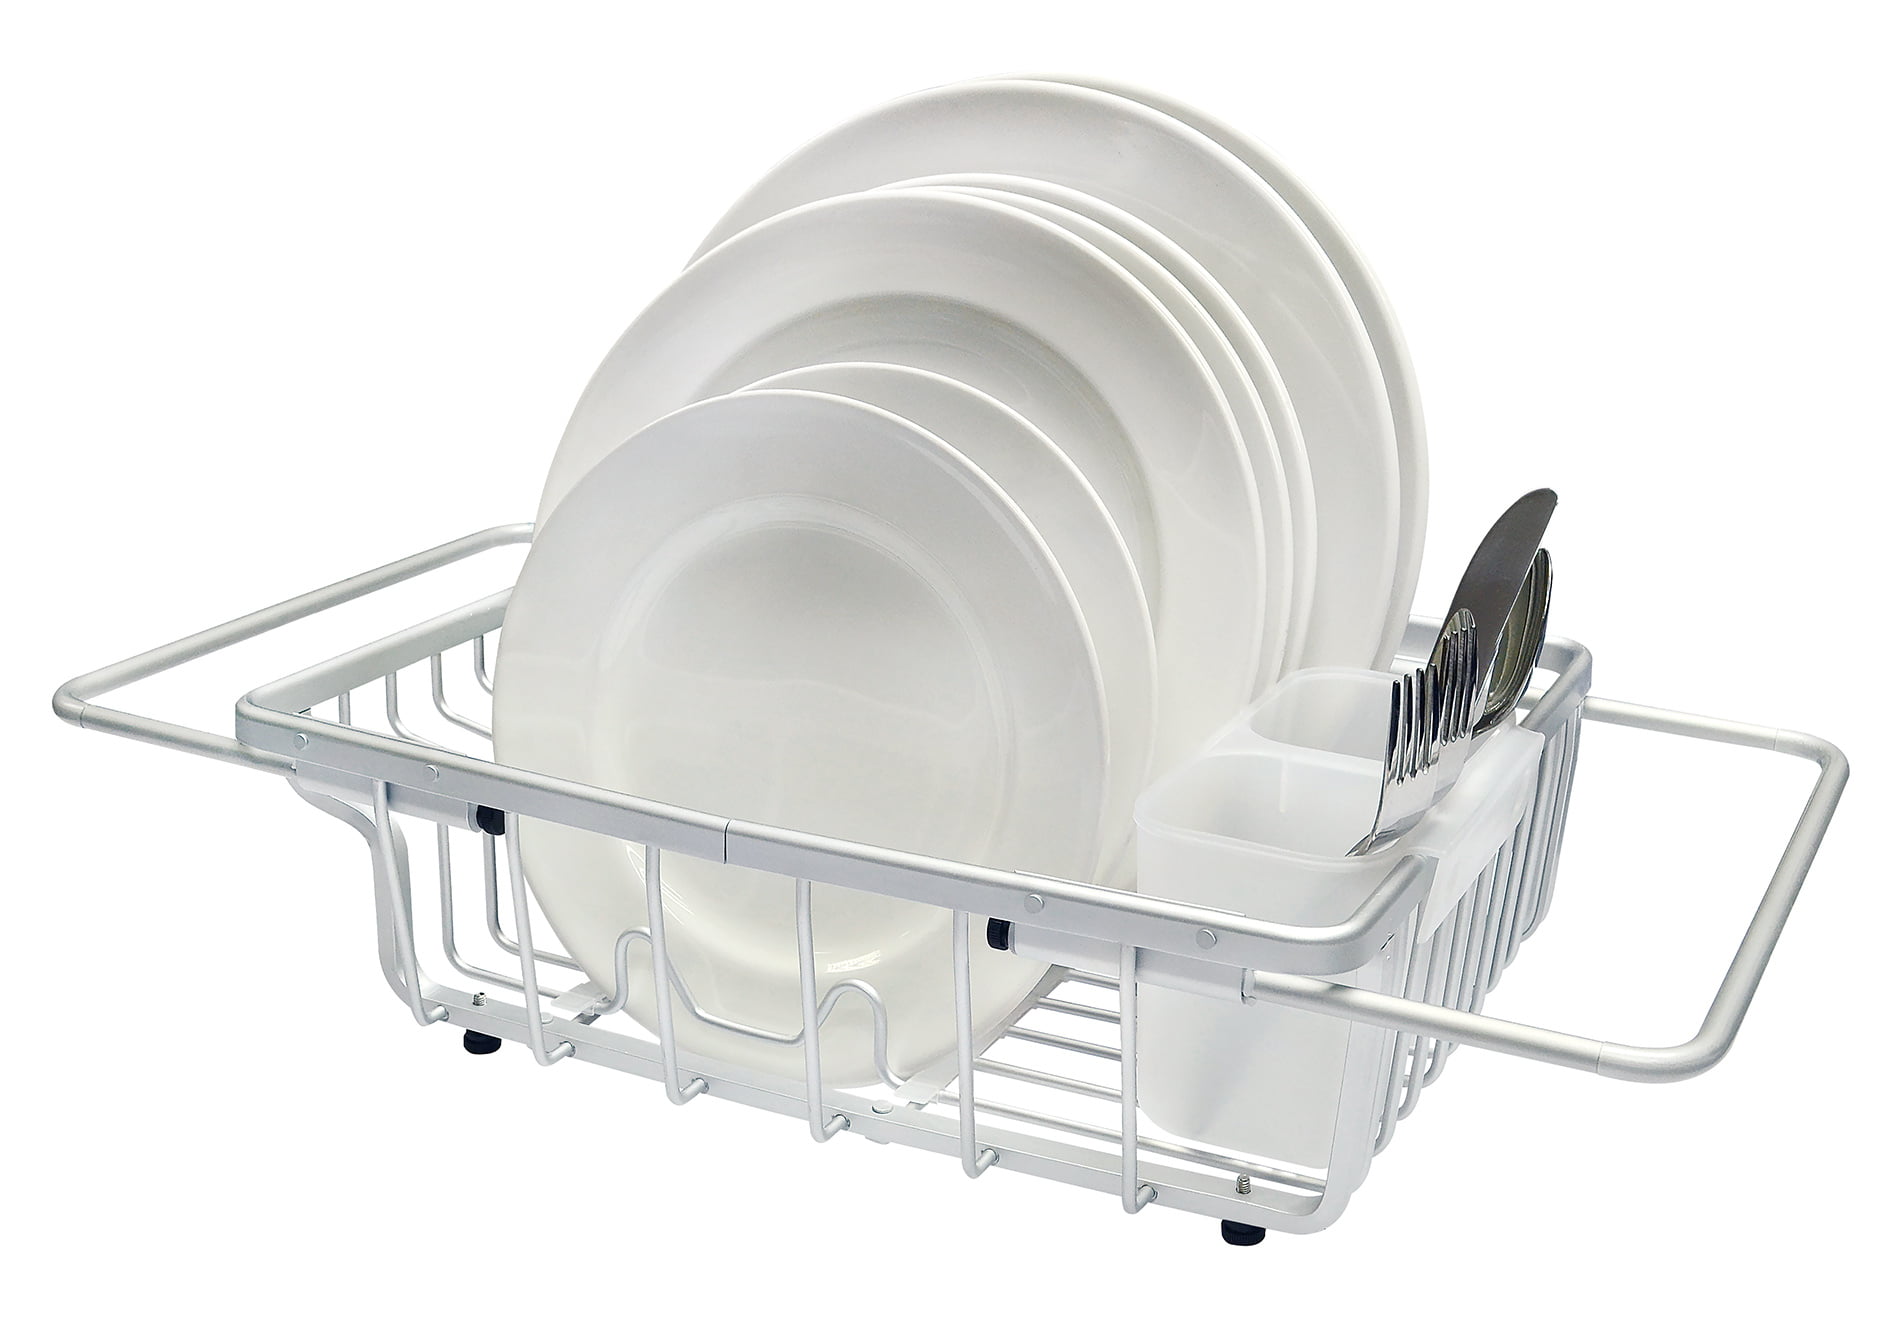 Real Home Innovations Dish Drying Rack Aluminum and Grey Delivery